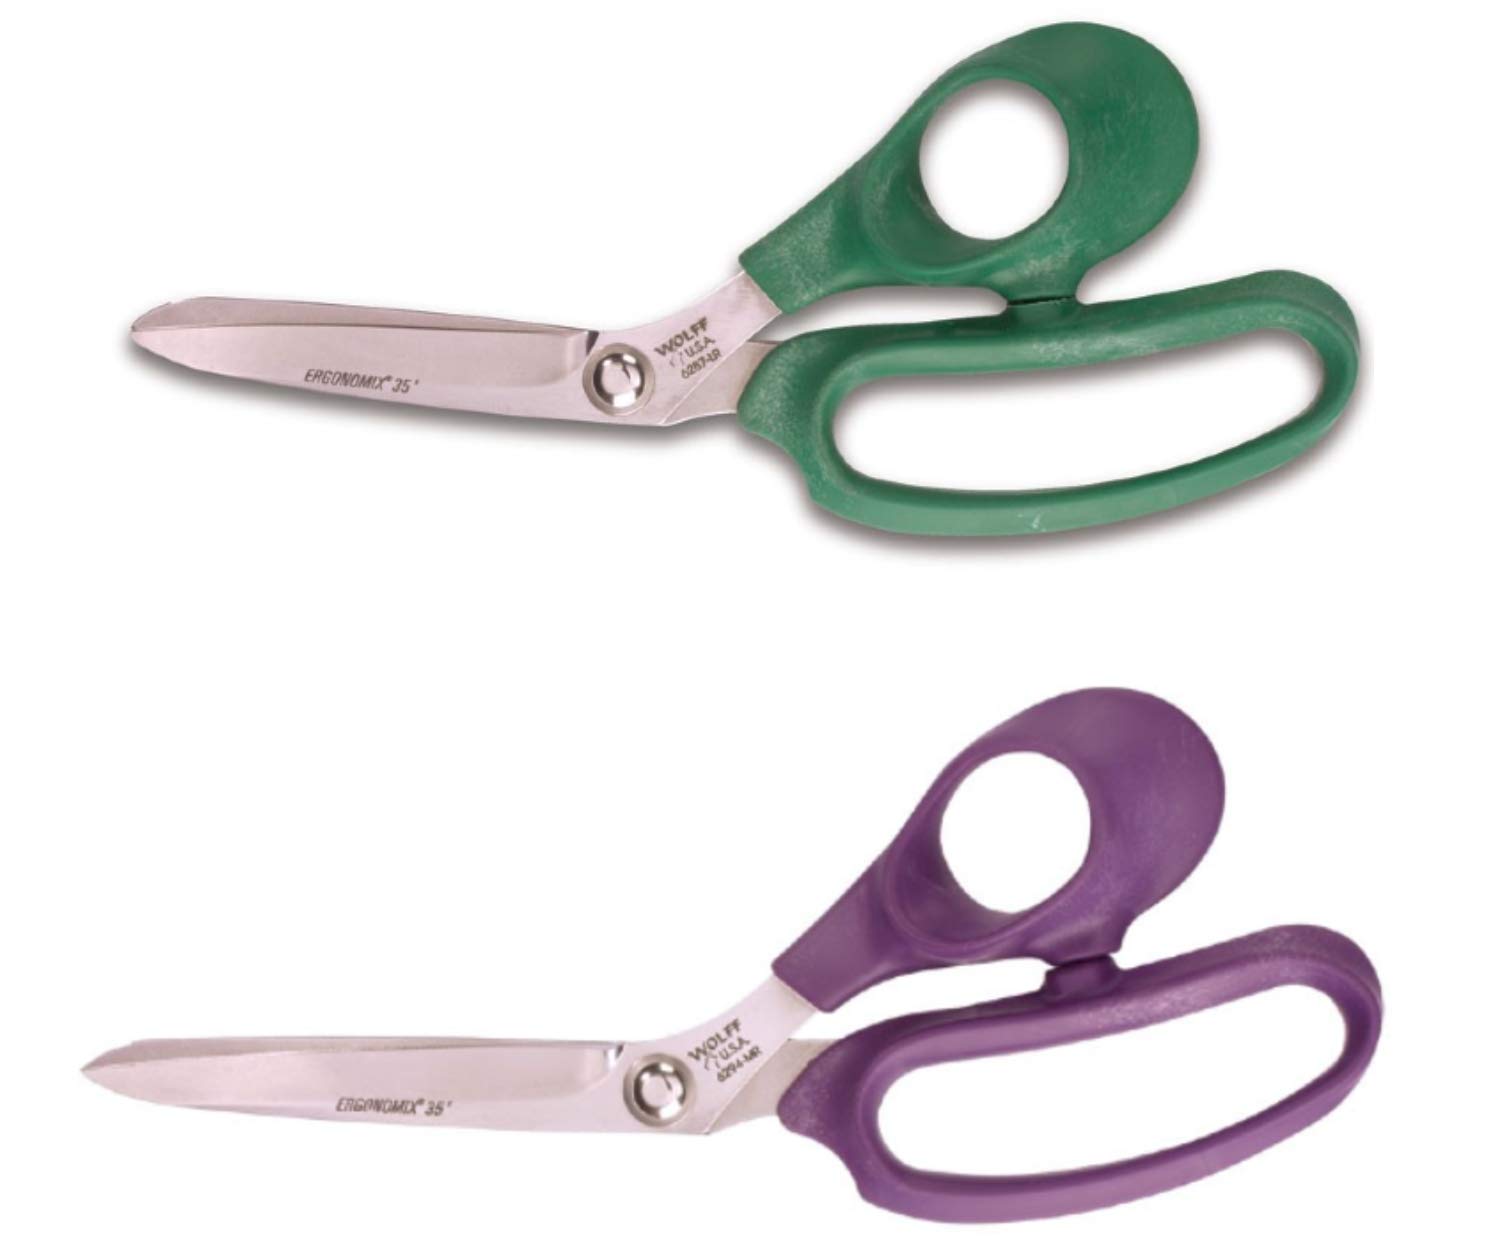 Wolff Ergonomix Shear Sets - Made in USA - High End Sturdy Scissors for Gift Wrapping Kitchen Poultry Fabric Sewing Ind